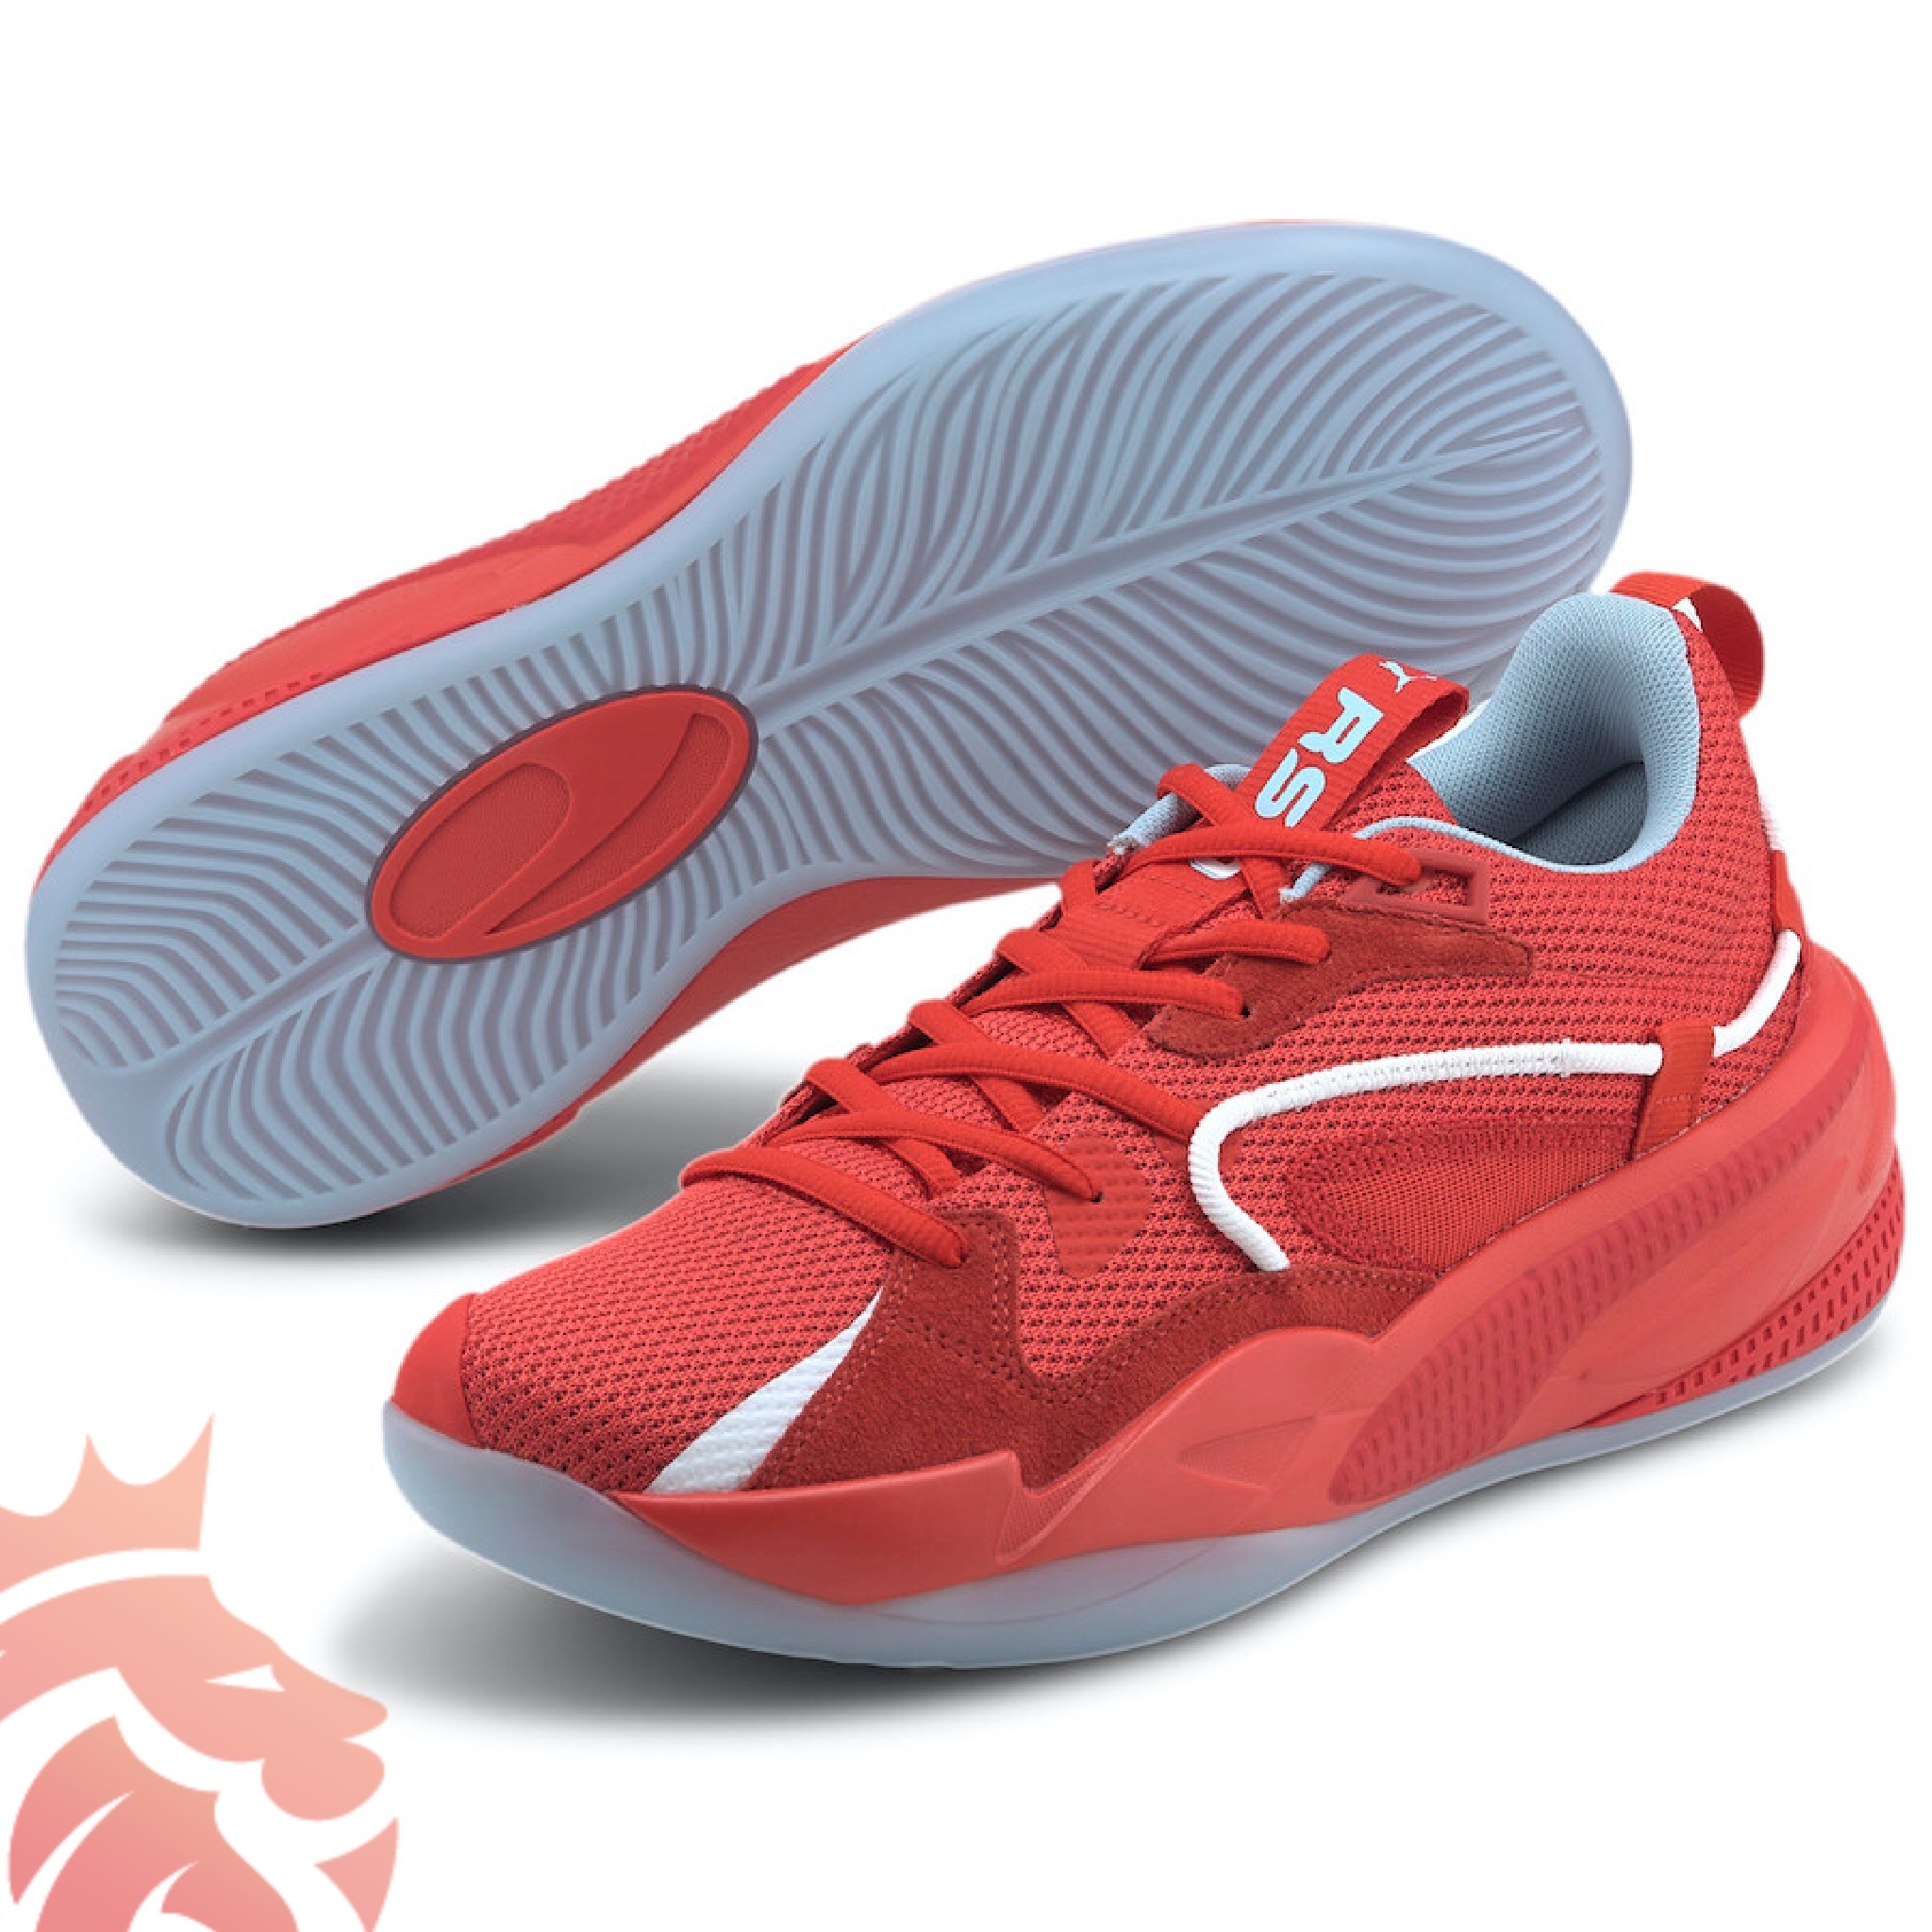 J. Cole x PUMA RS-Dreamer “Blood, Sweat and Tears” 194602-01 Fiery Red/Ribbon Red